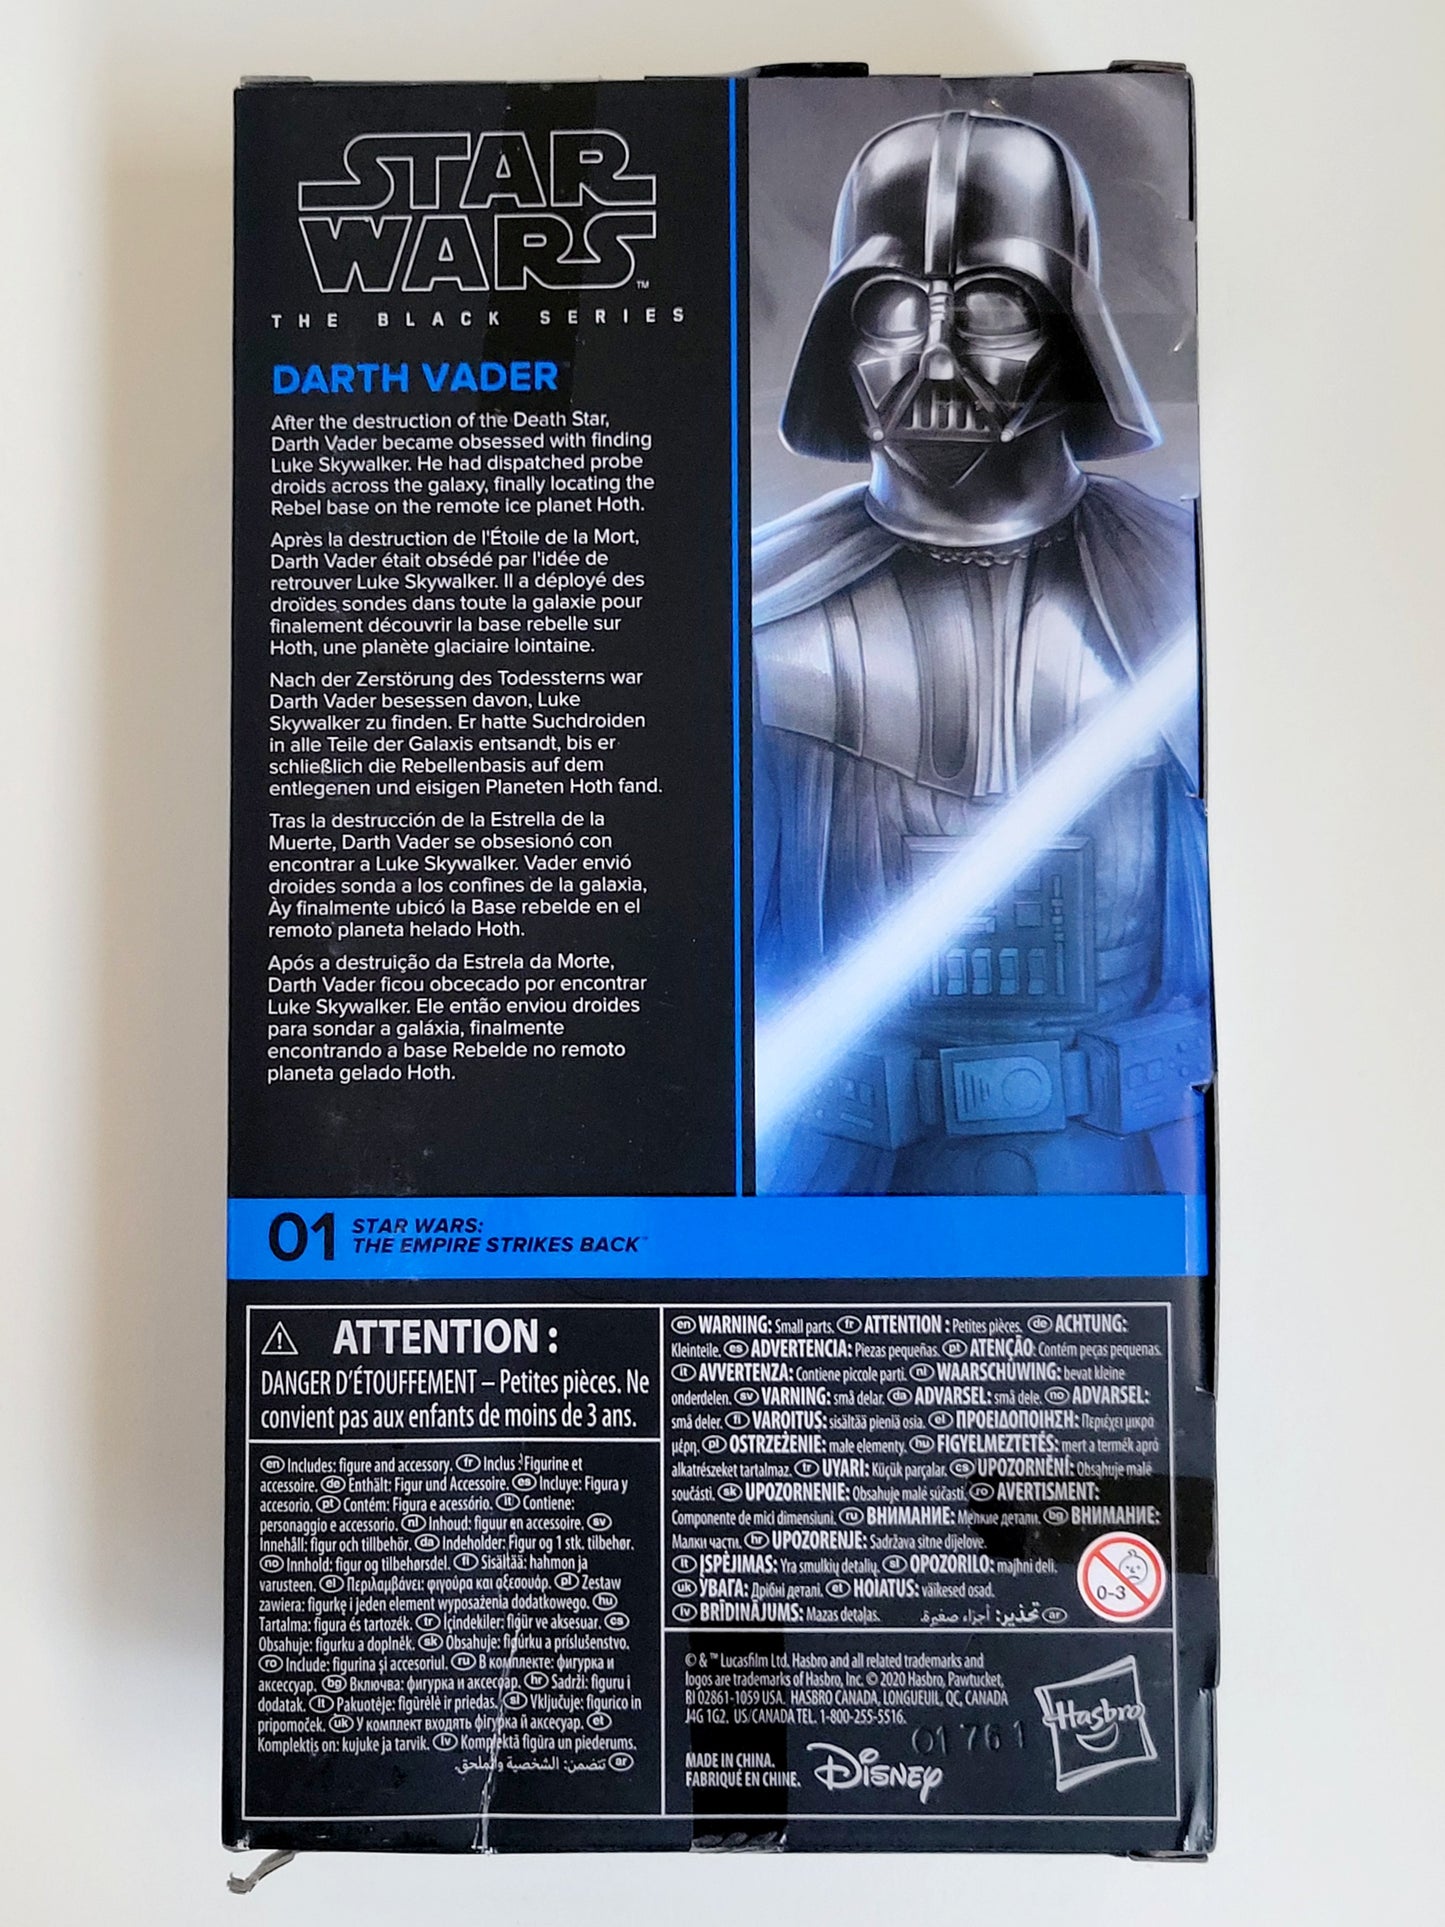 Sar Wars: The Black Series Darth Vader 6-Inch Action Figure from Star Wars: The Empire Strikes Back